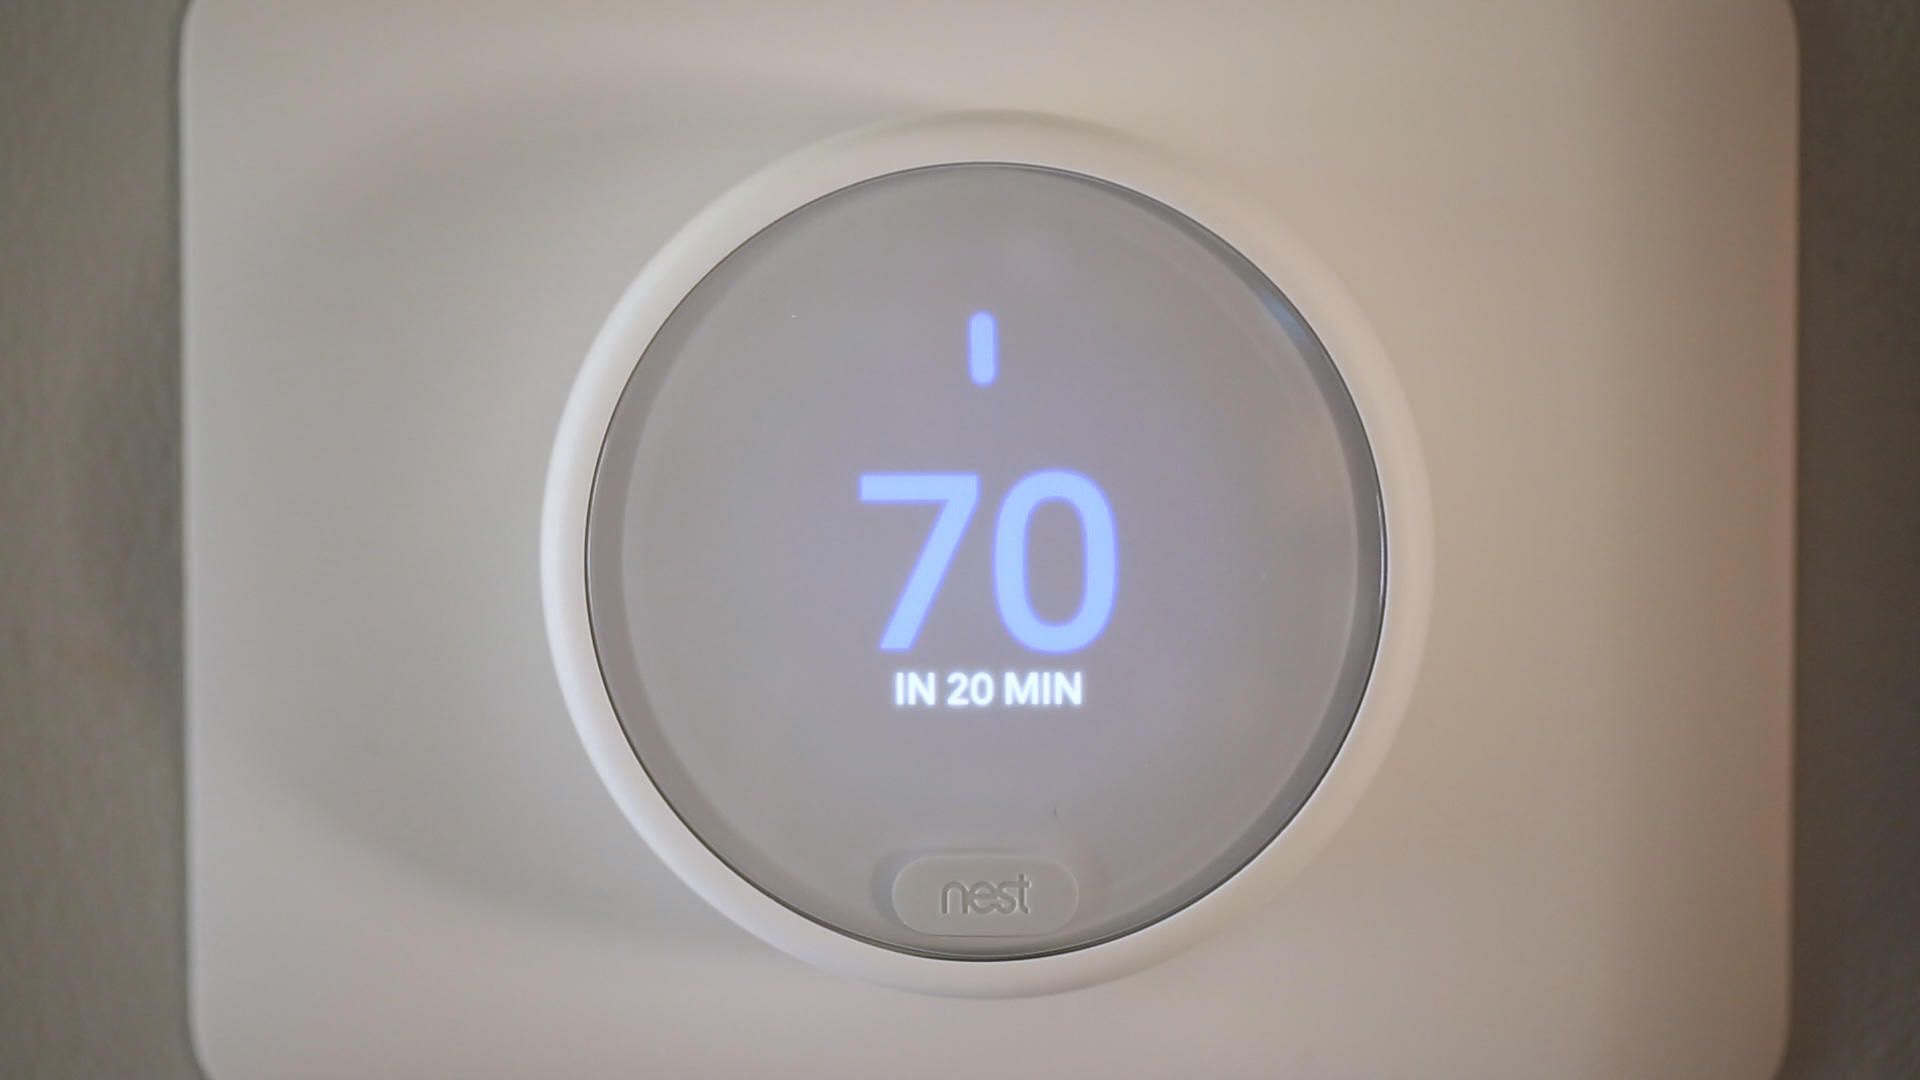 Nest will offer 1 million free or low-cost thermostats for Earth DayNest will offer 1 million free or low-cost thermostats for Earth Day